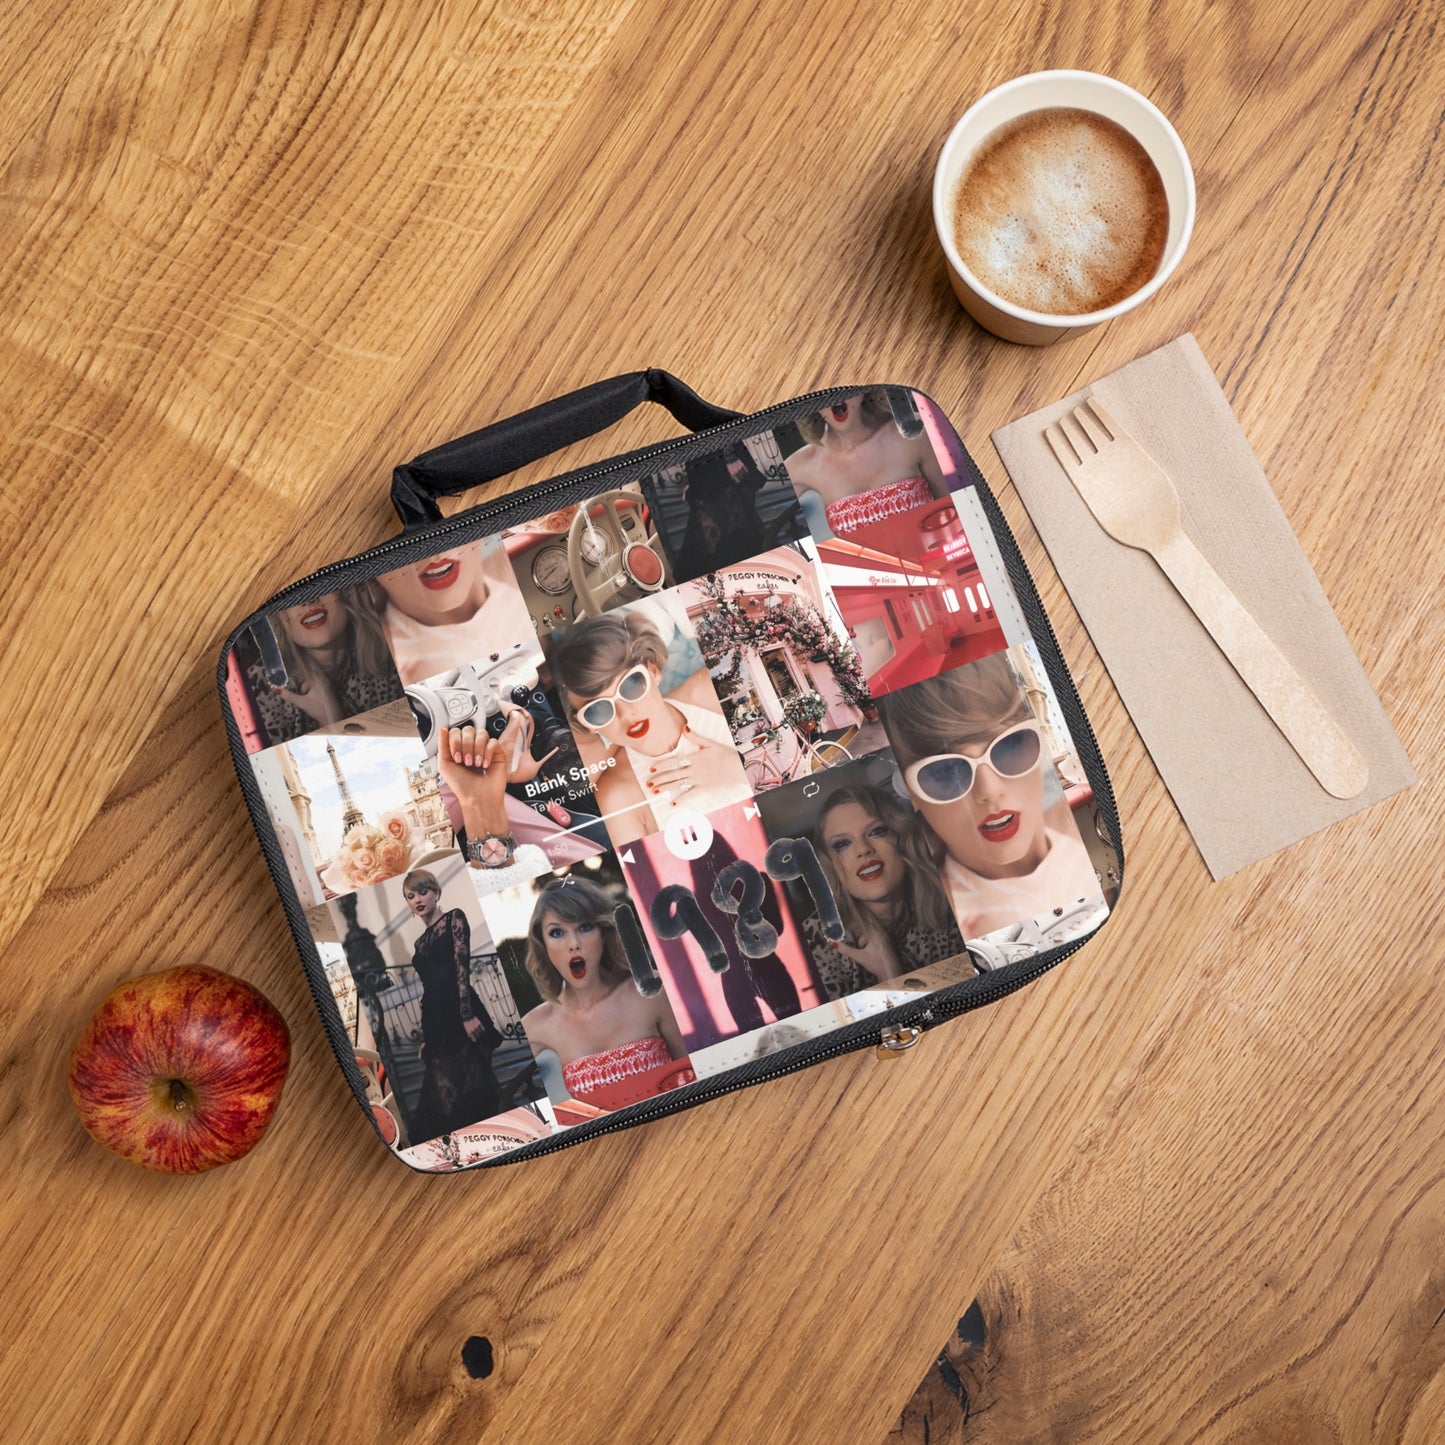 Taylor Swift 1989 Blank Space Collage Lunch Bag